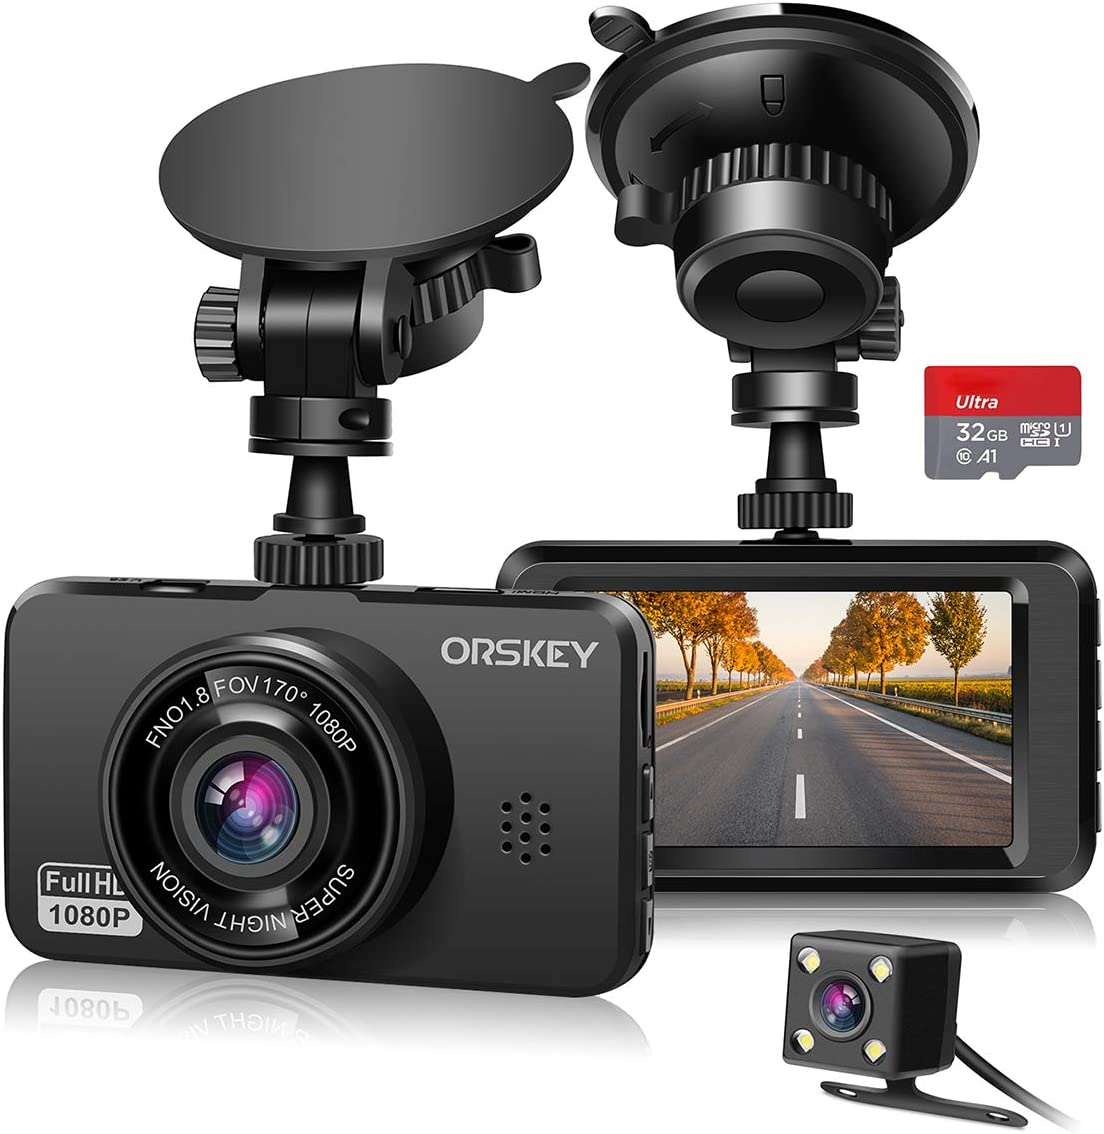 ORSKEY Dash Cam S680 1080P Full HD Car Camera DVR Dashboard 170 Wide Angle WDR